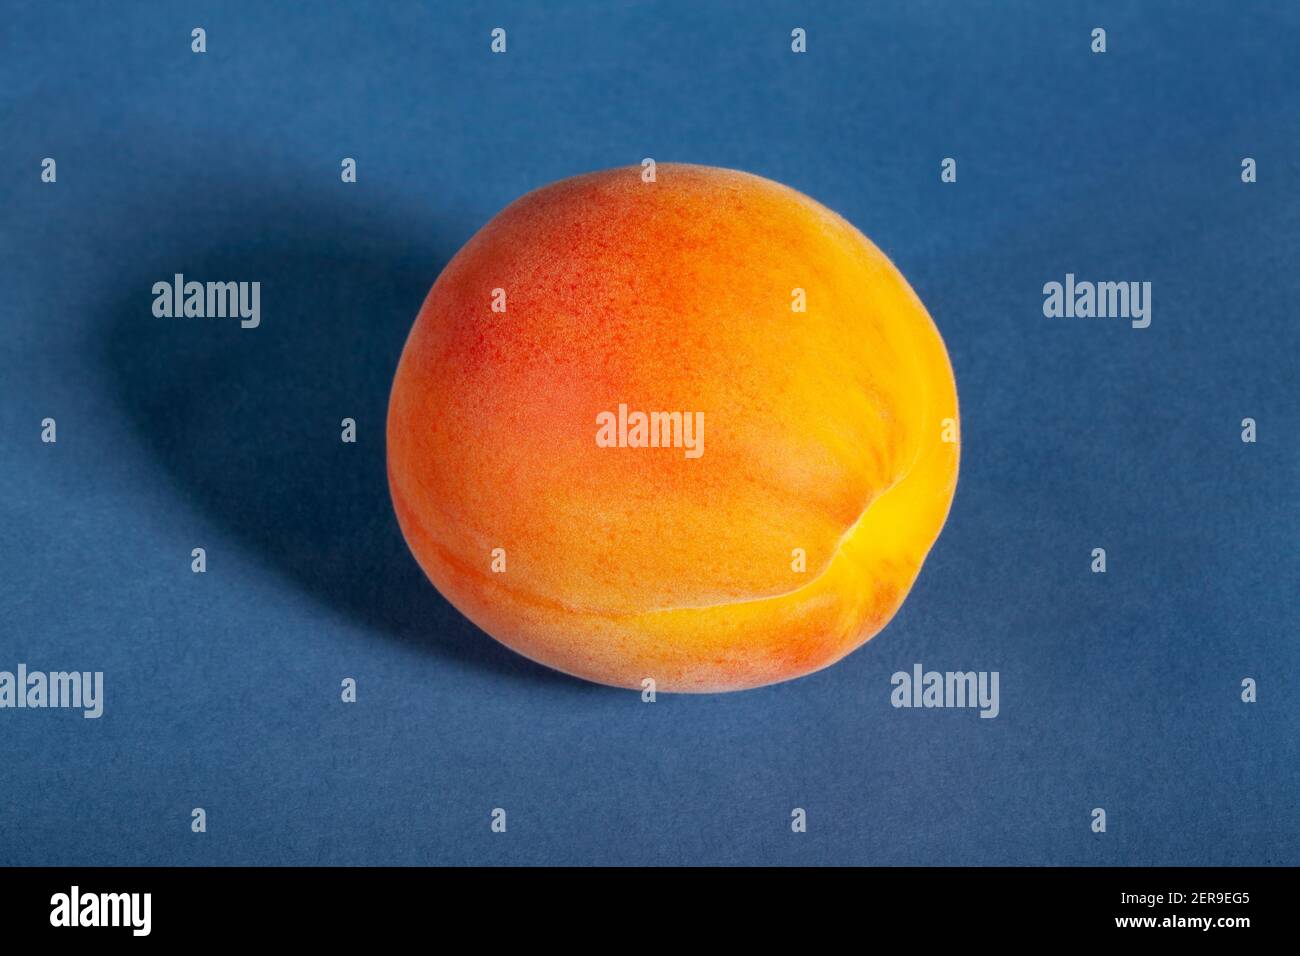 one apricot on blue background Stock Photo